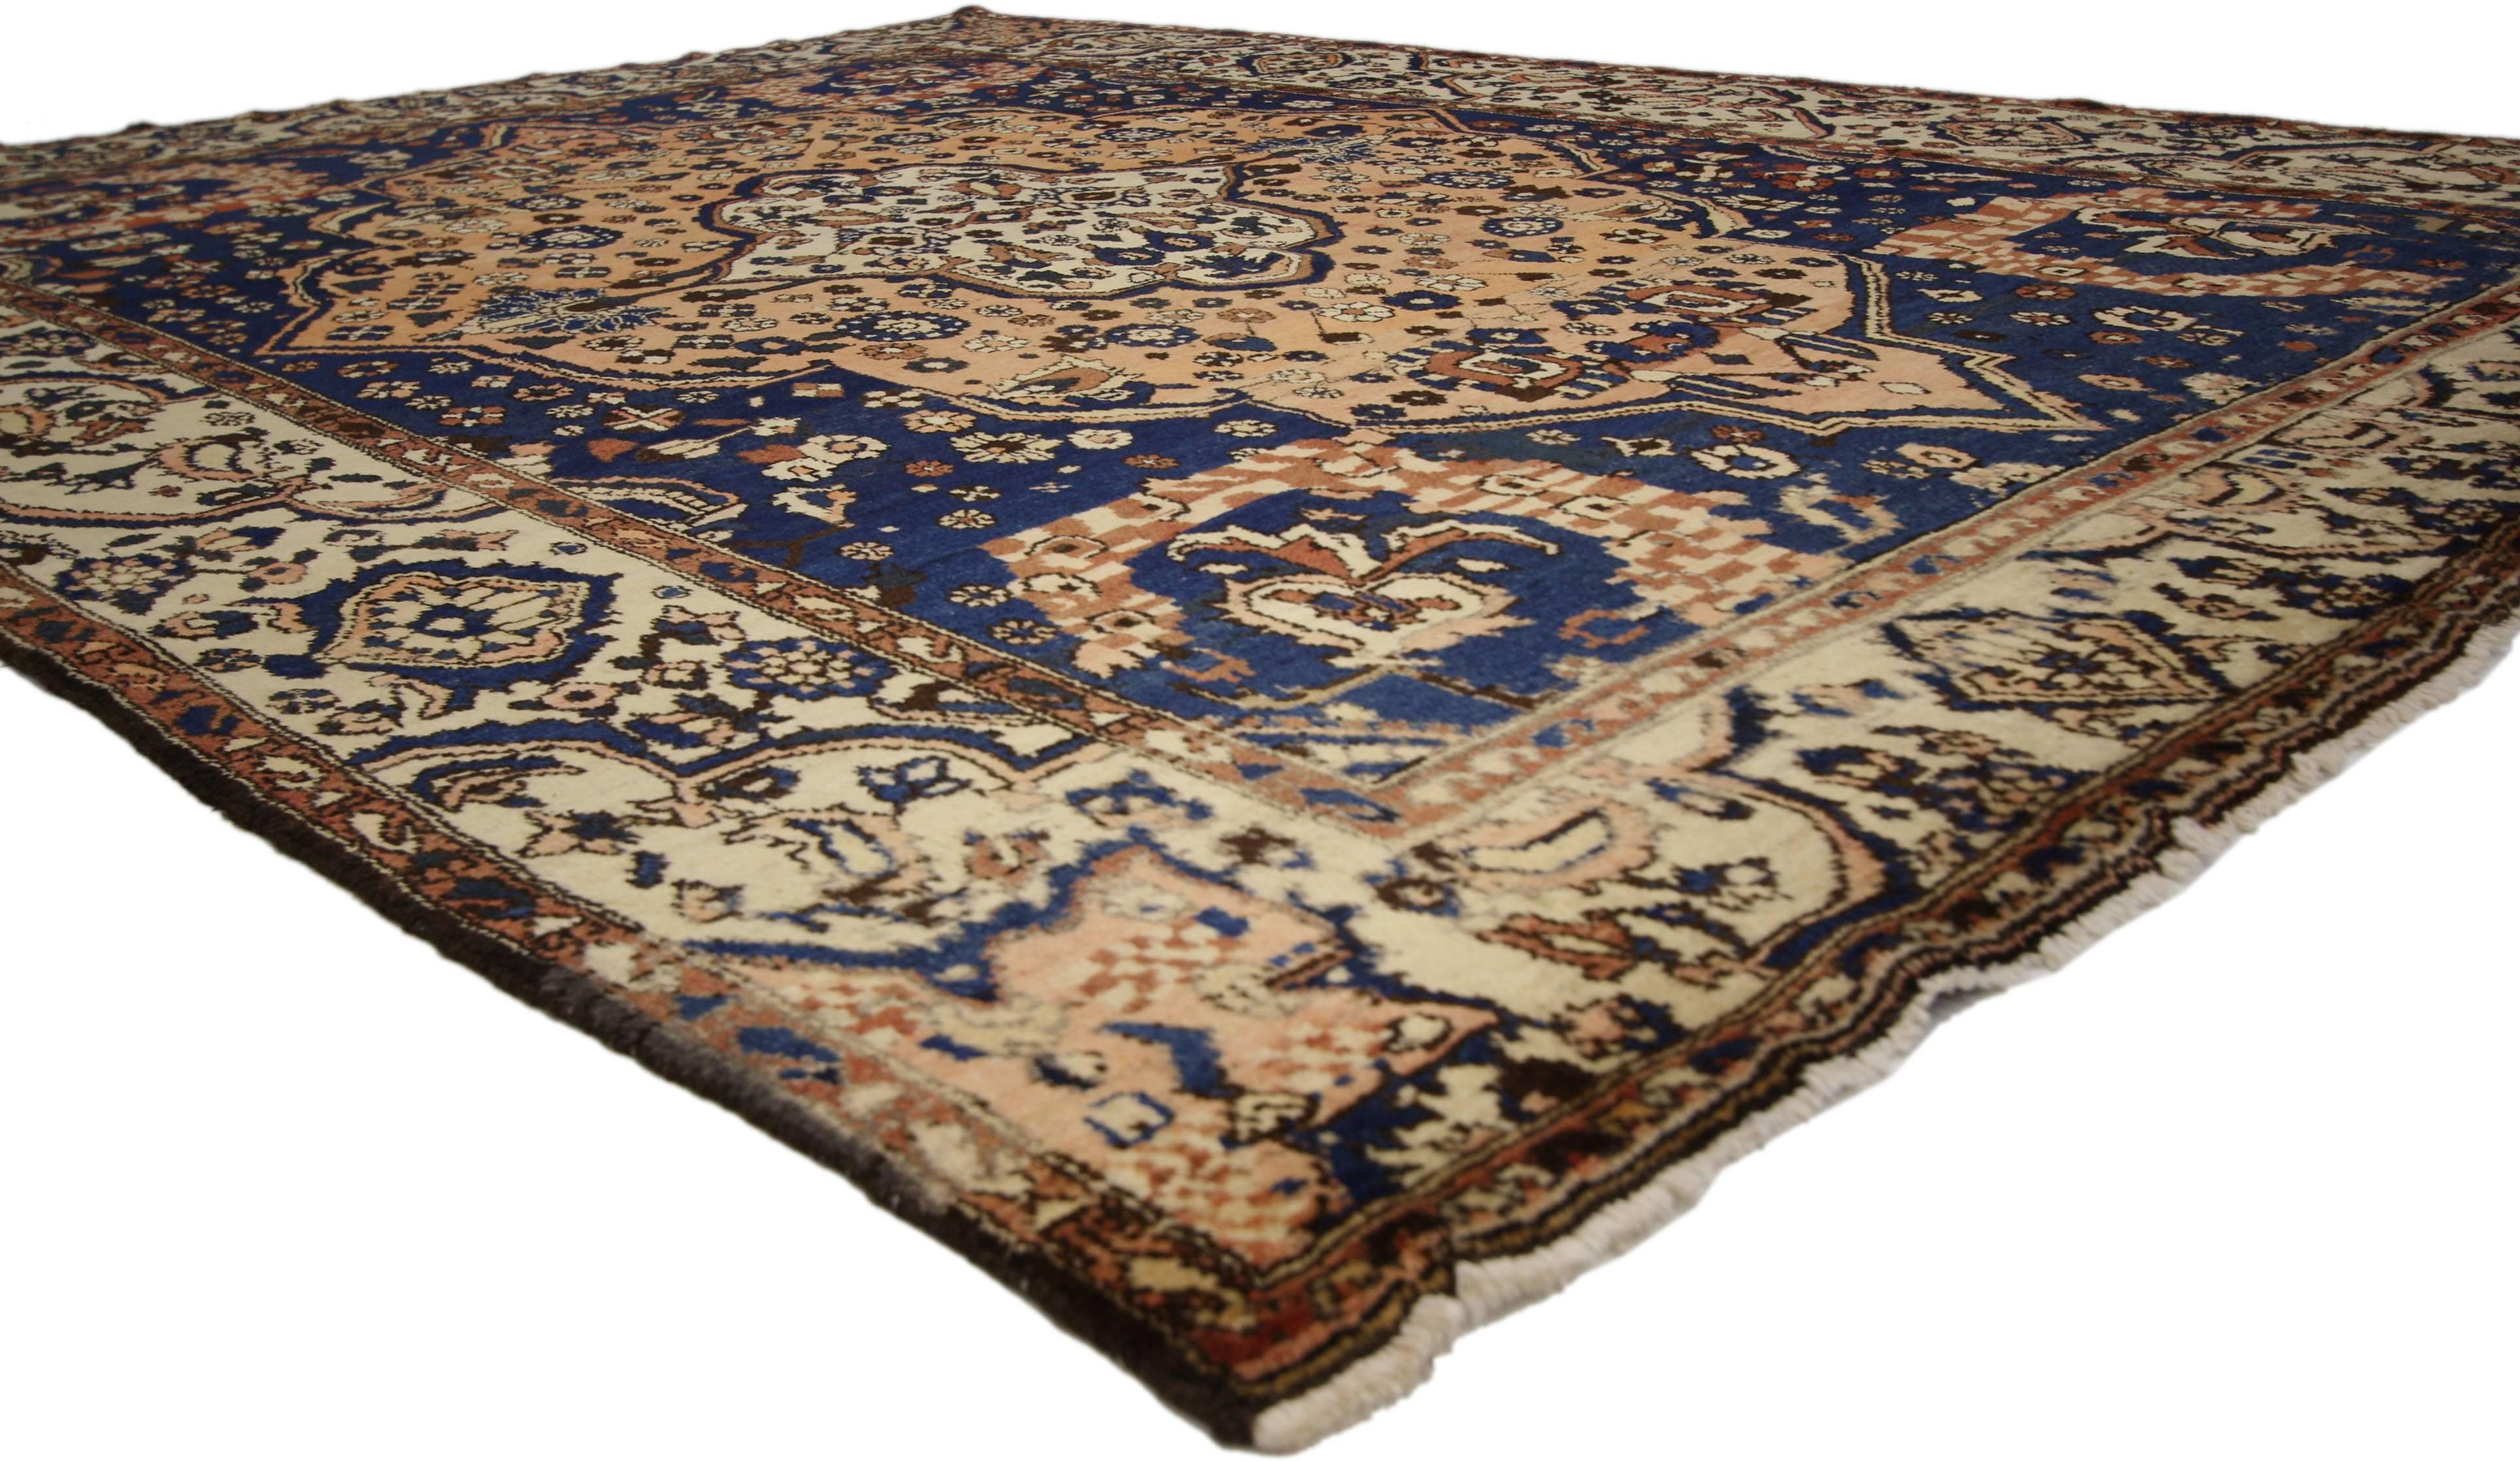 75714 Vintage Persian Bakhtiari Rug with Rustic Modern Italian Style 07’05 x 09’05. With its navy blue and warm rustic peach hues, this hand knotted Persian Bakhtiari rug is well-balanced and poised to impress. It features a concentric cusped almond